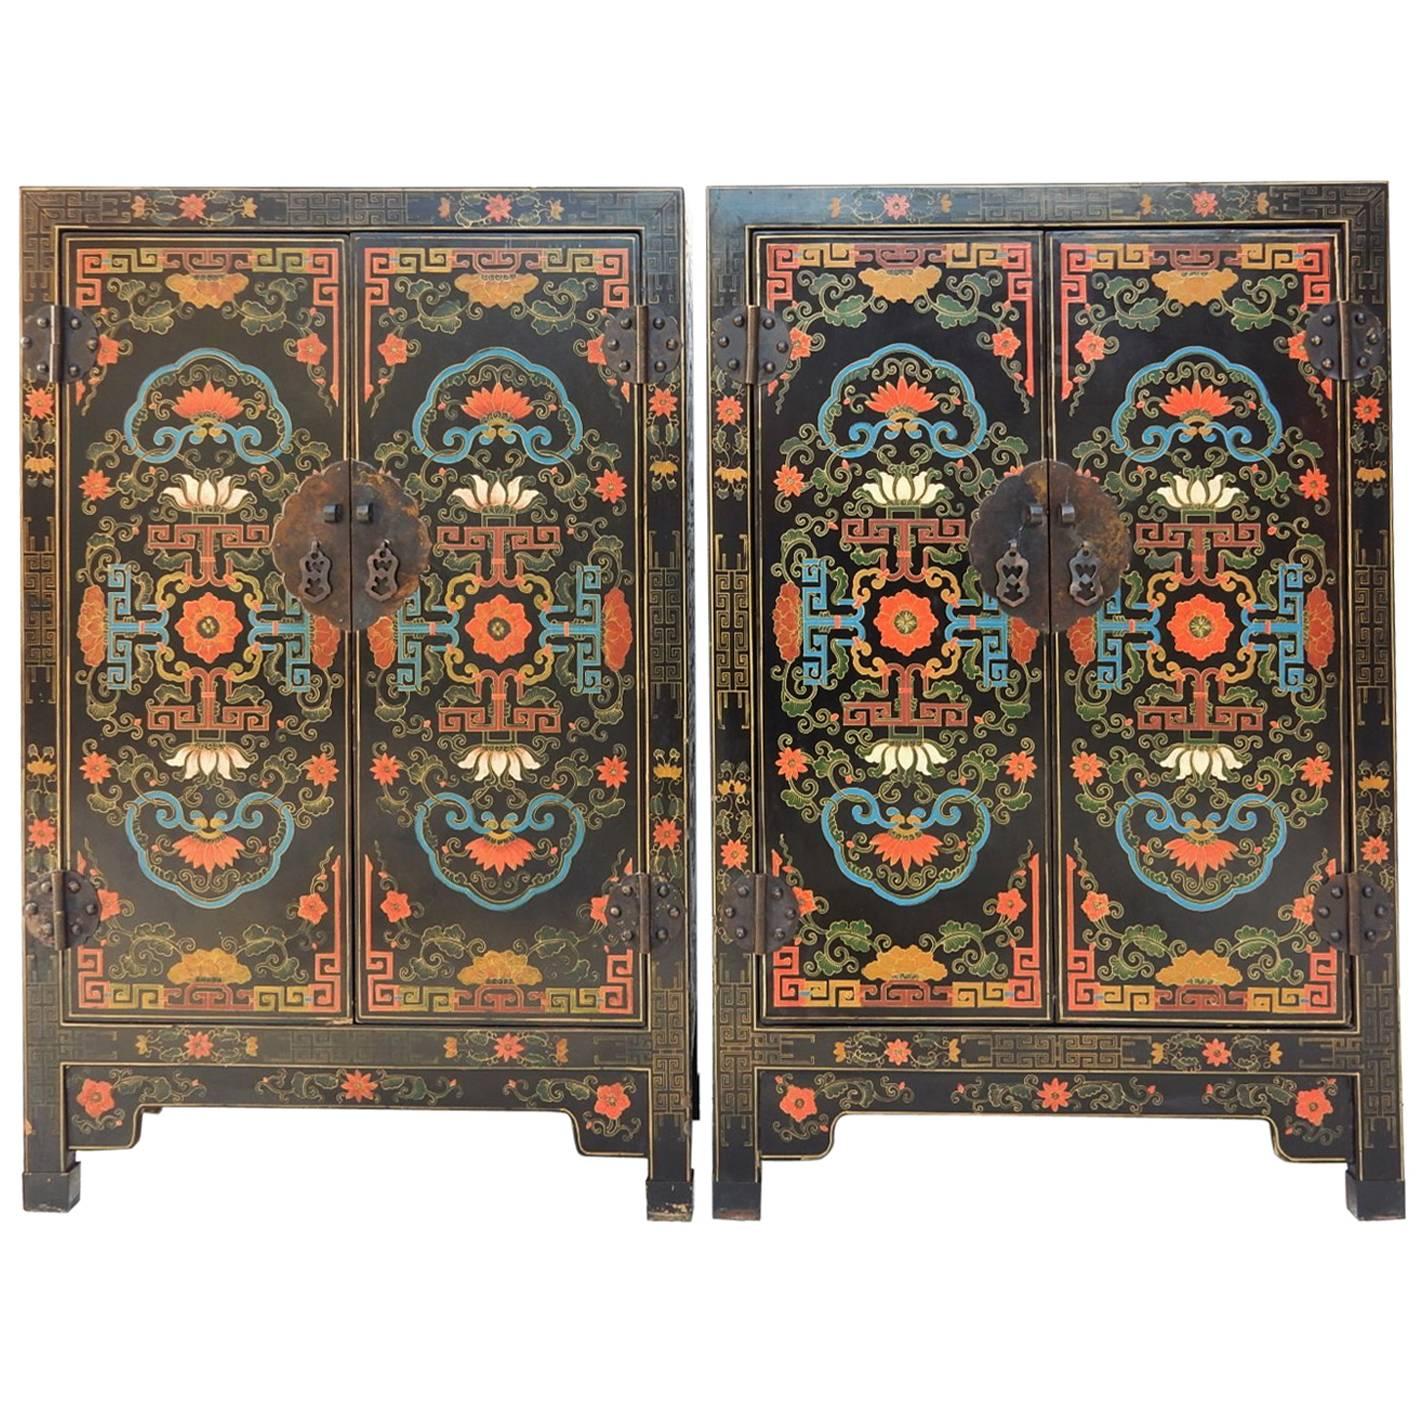 Art Nouveau Asian Wedding Cabinets with Detailed Polychrome Design